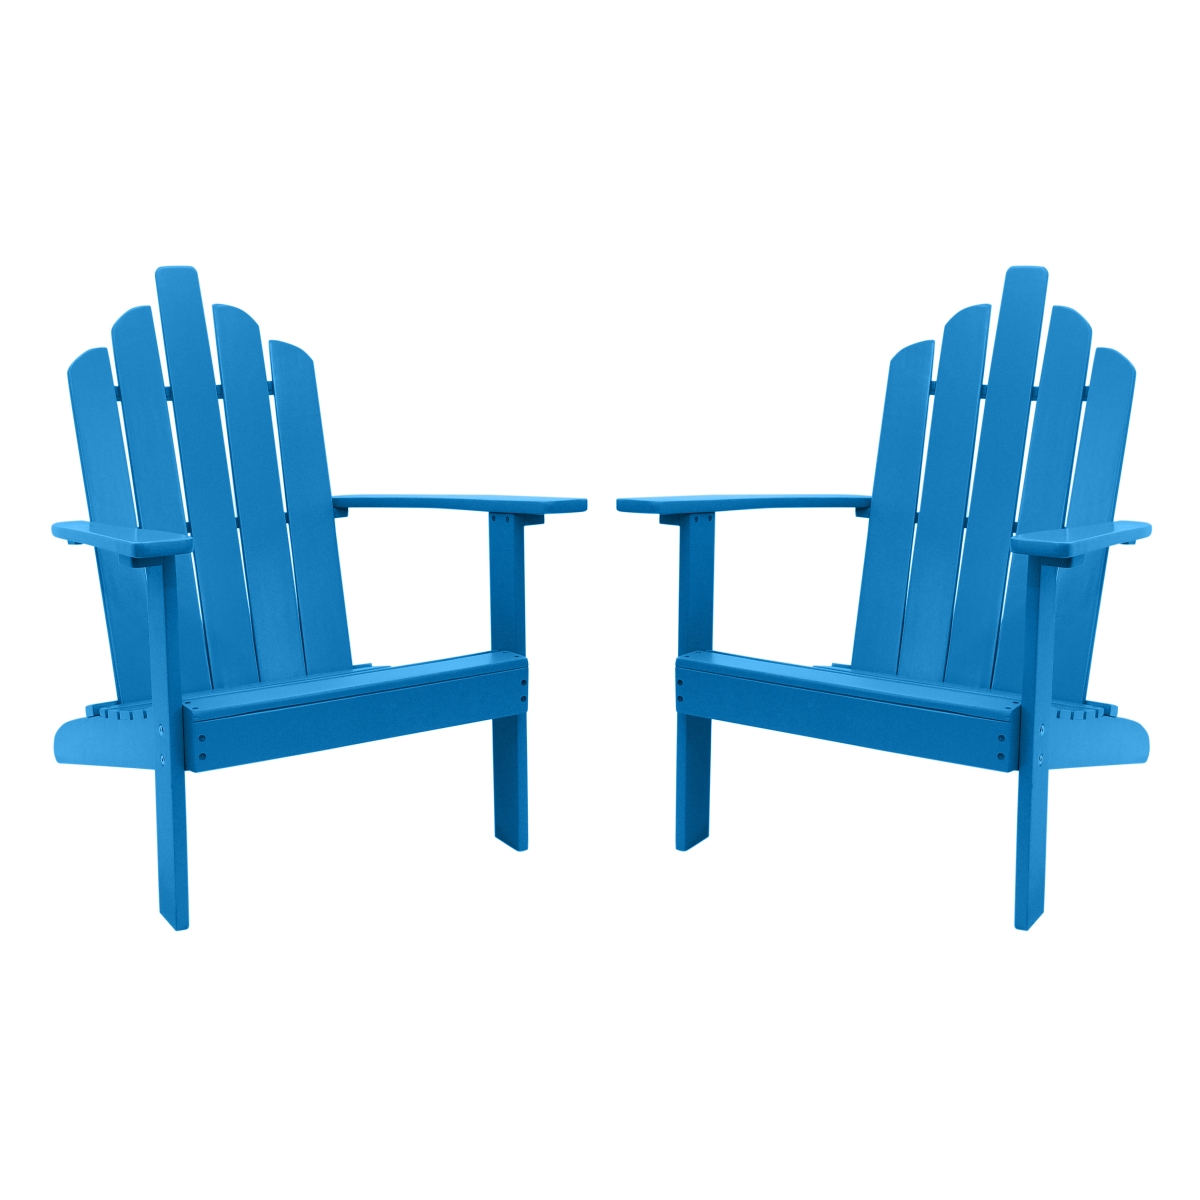 2003071-2 Outdoor Patio Wood Adirondack Chair, Turquoise - Pack Of 2